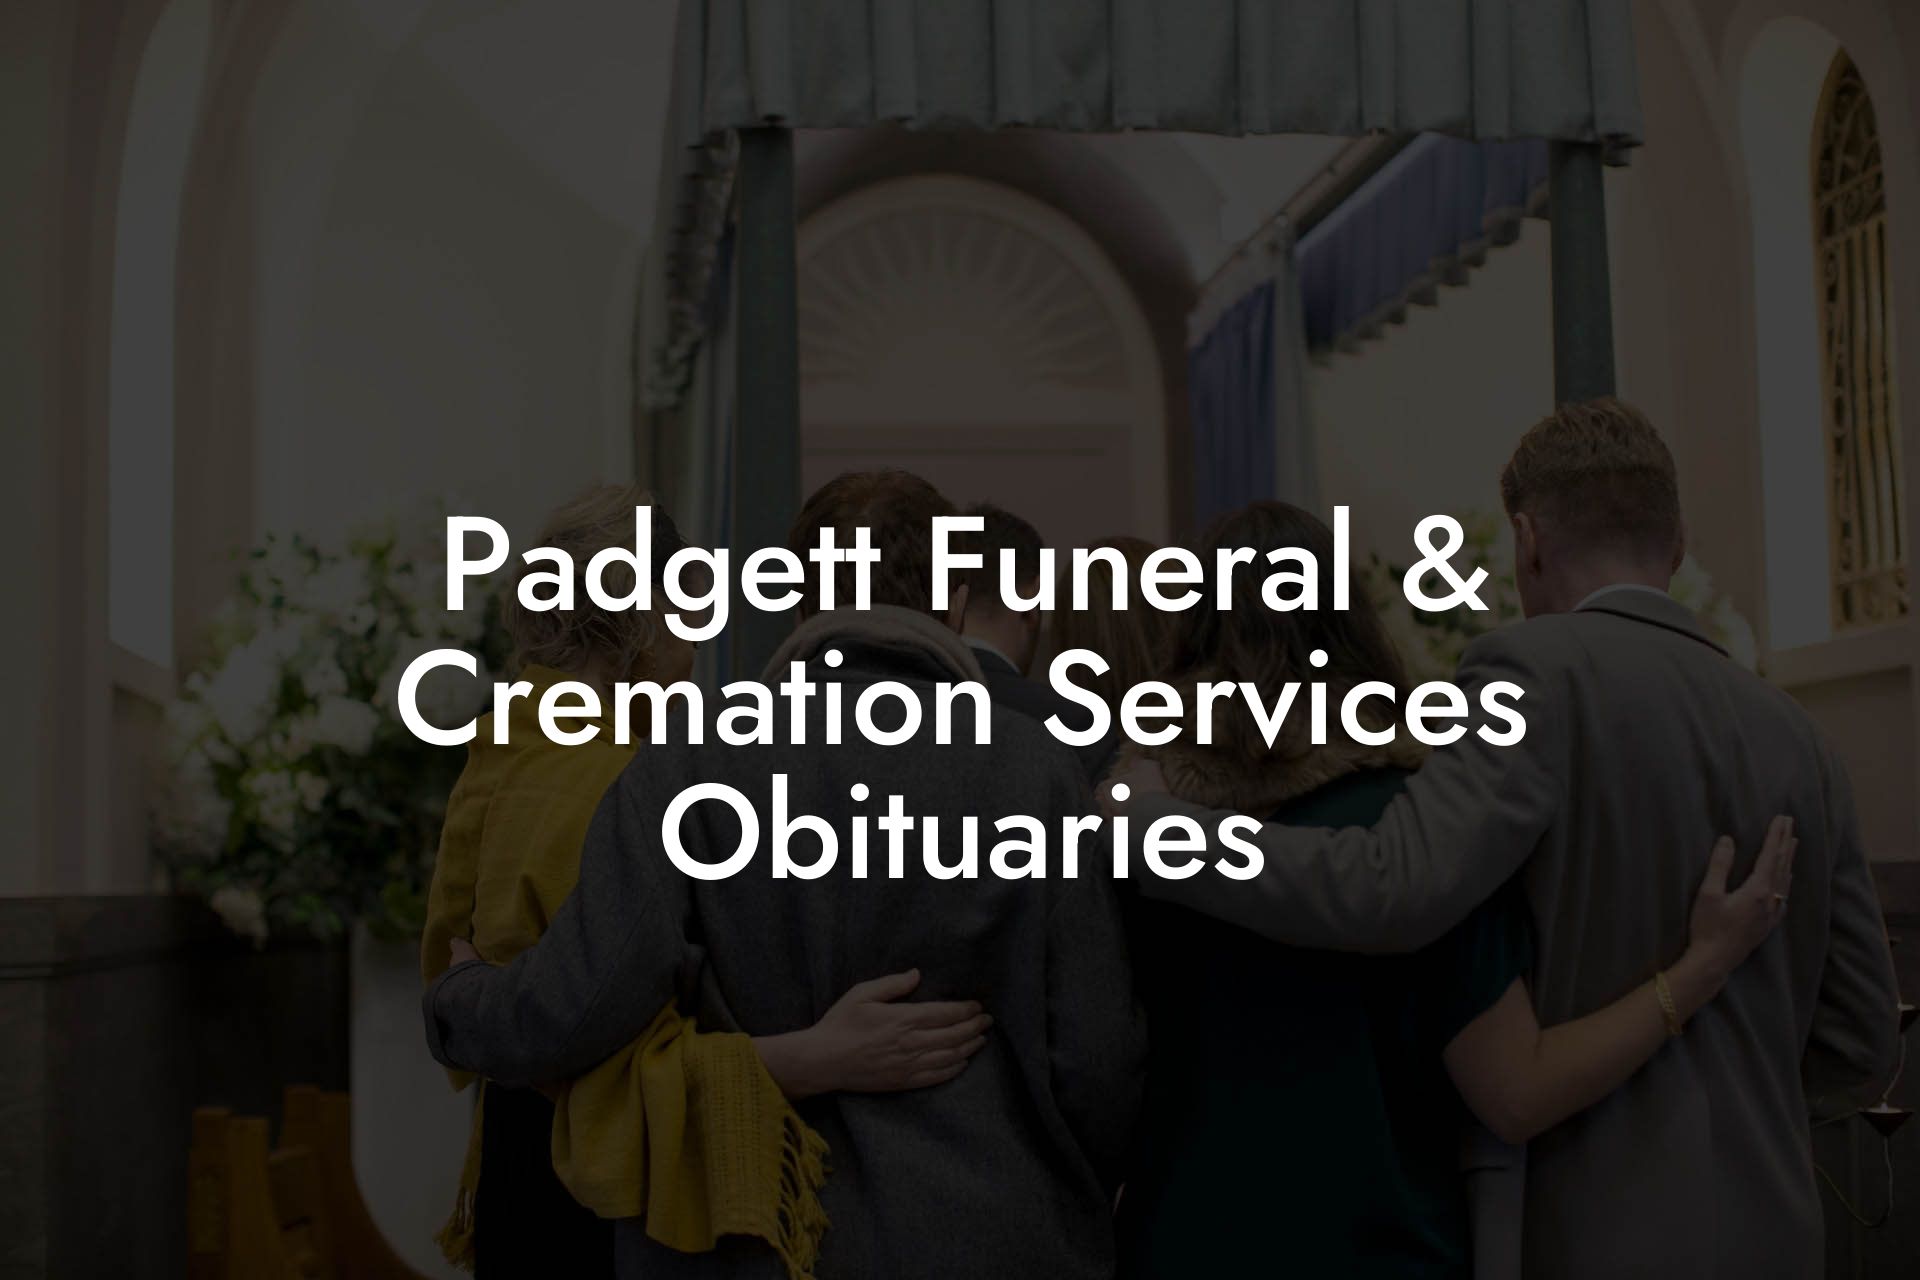 Padgett Funeral & Cremation Services Obituaries